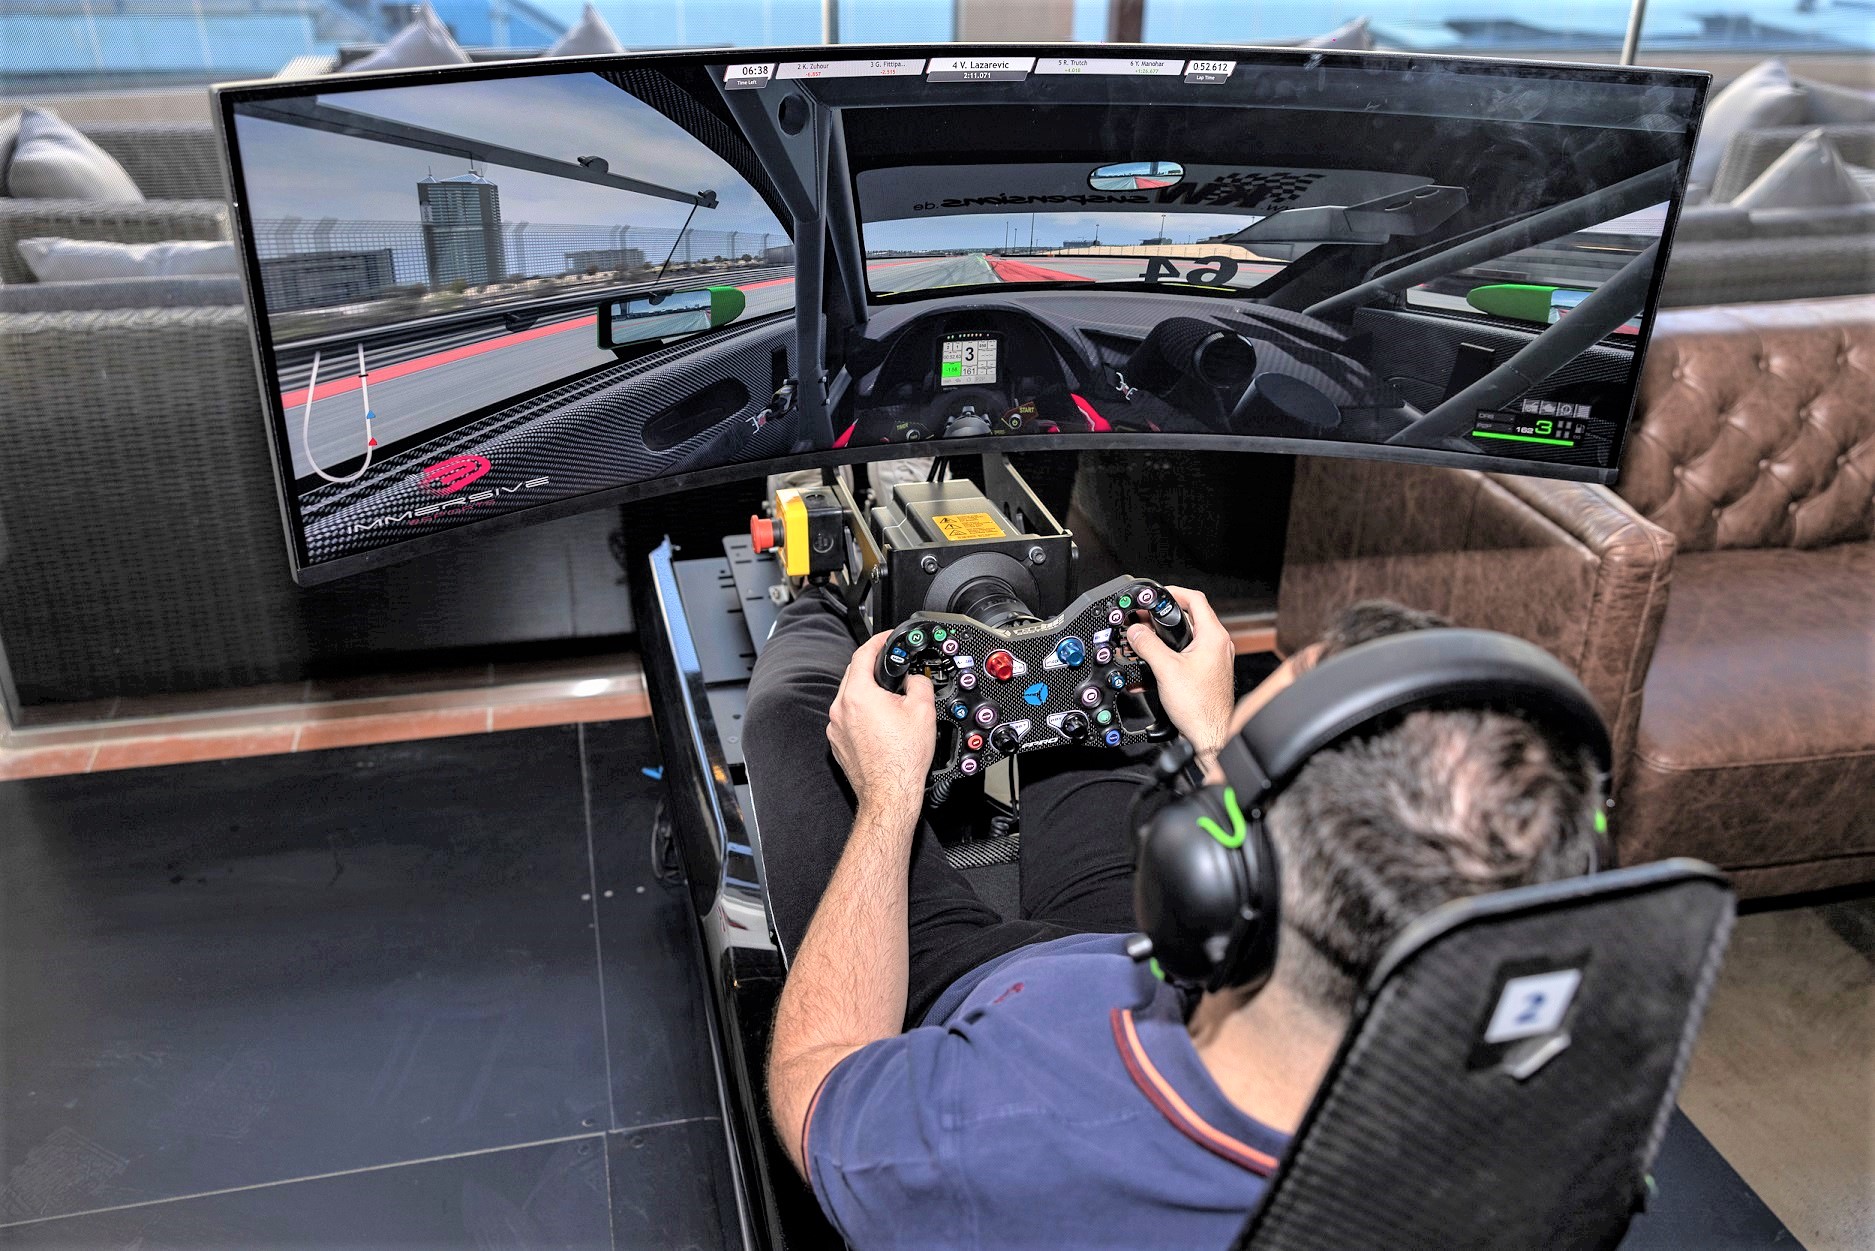 New sim racing venue launched to send young talent  into motor sport     Rising UAE star backs Dubai facility to provide springboard  from virtual to real-life race careers